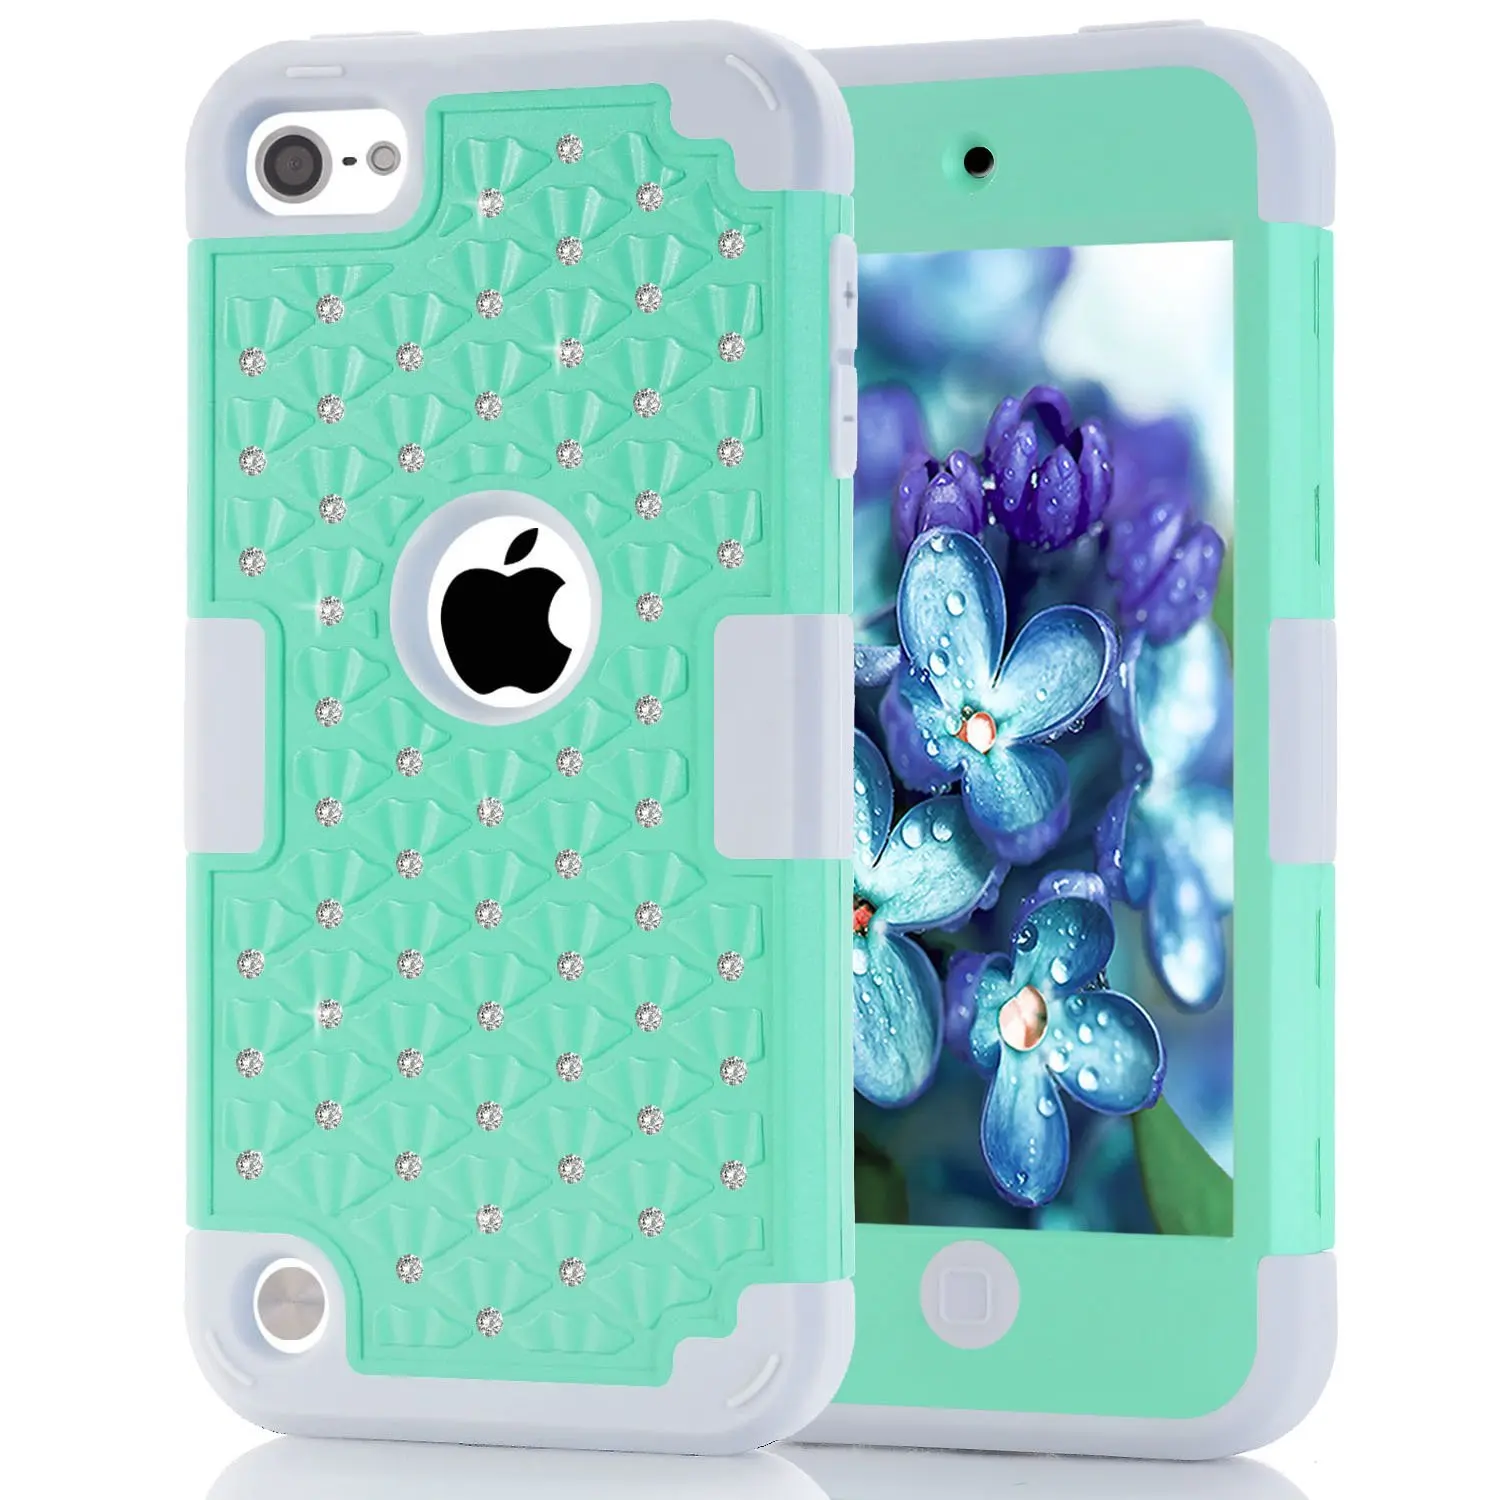 iPod Touch 6th Generation Case,Lantier 3 Layers Verge Hybrid Soft Silicone Hard Plastic TUFF Triple Quakeproof Drop Resistance Protective Case Cover with Stylus Color Waves//Mint Green